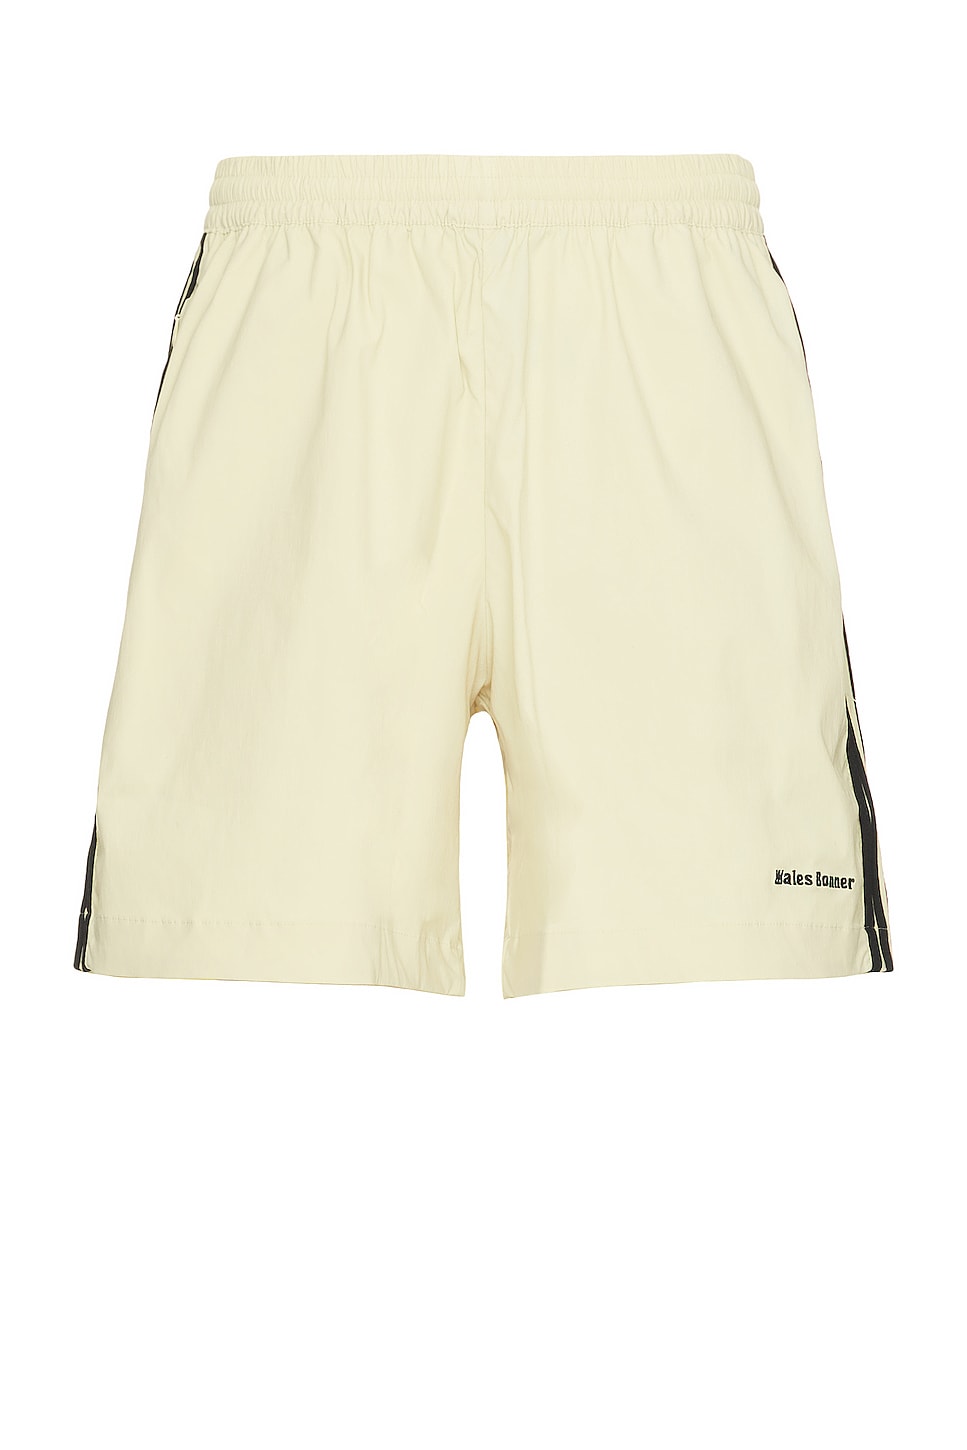 Image 1 of adidas by Wales Bonner Football Shorts in Sandy Beige